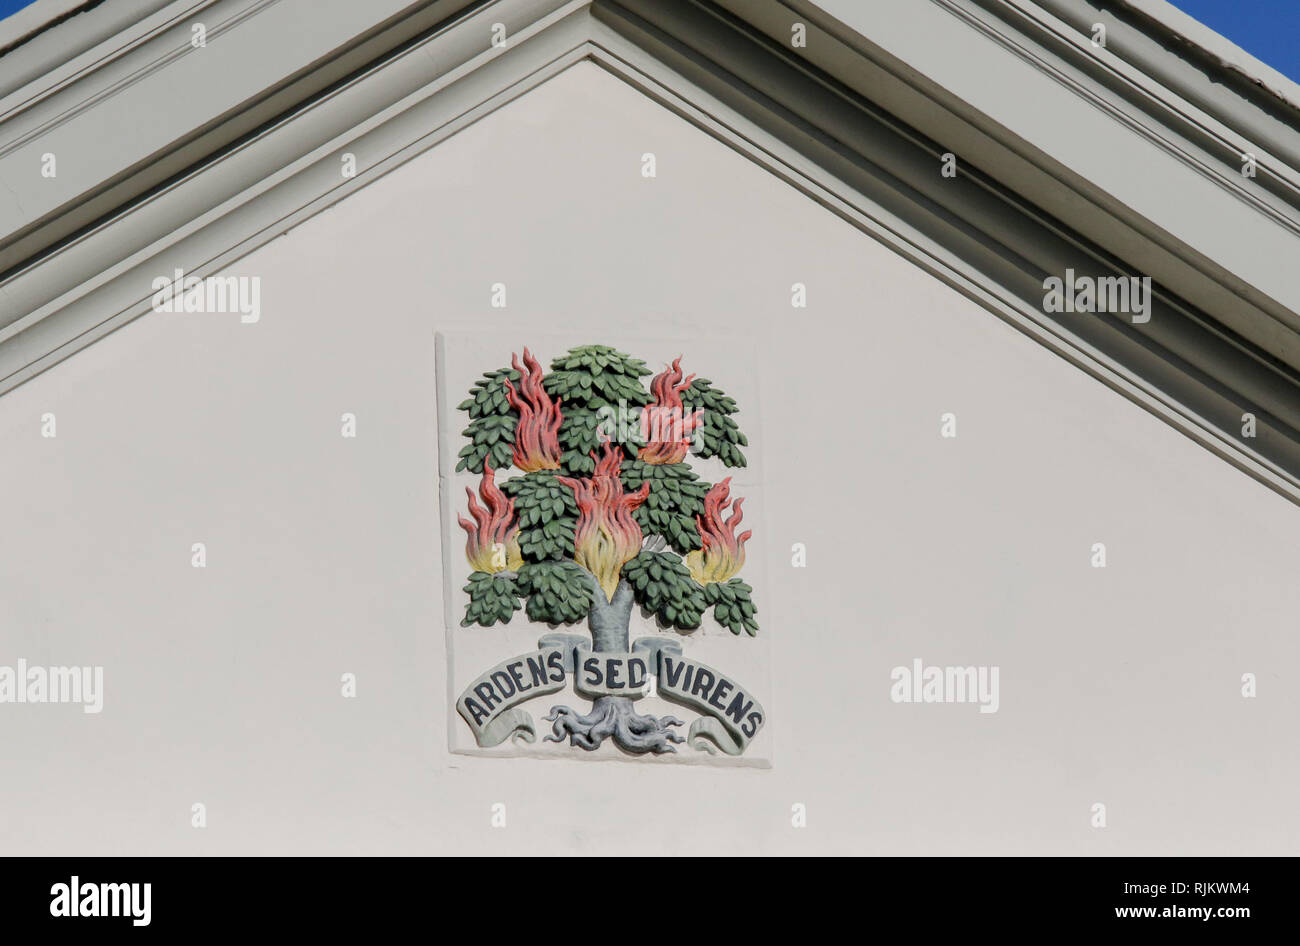 Ardens sed virens - logo and motto of the Presbyterian Church in Ireland. Stock Photo